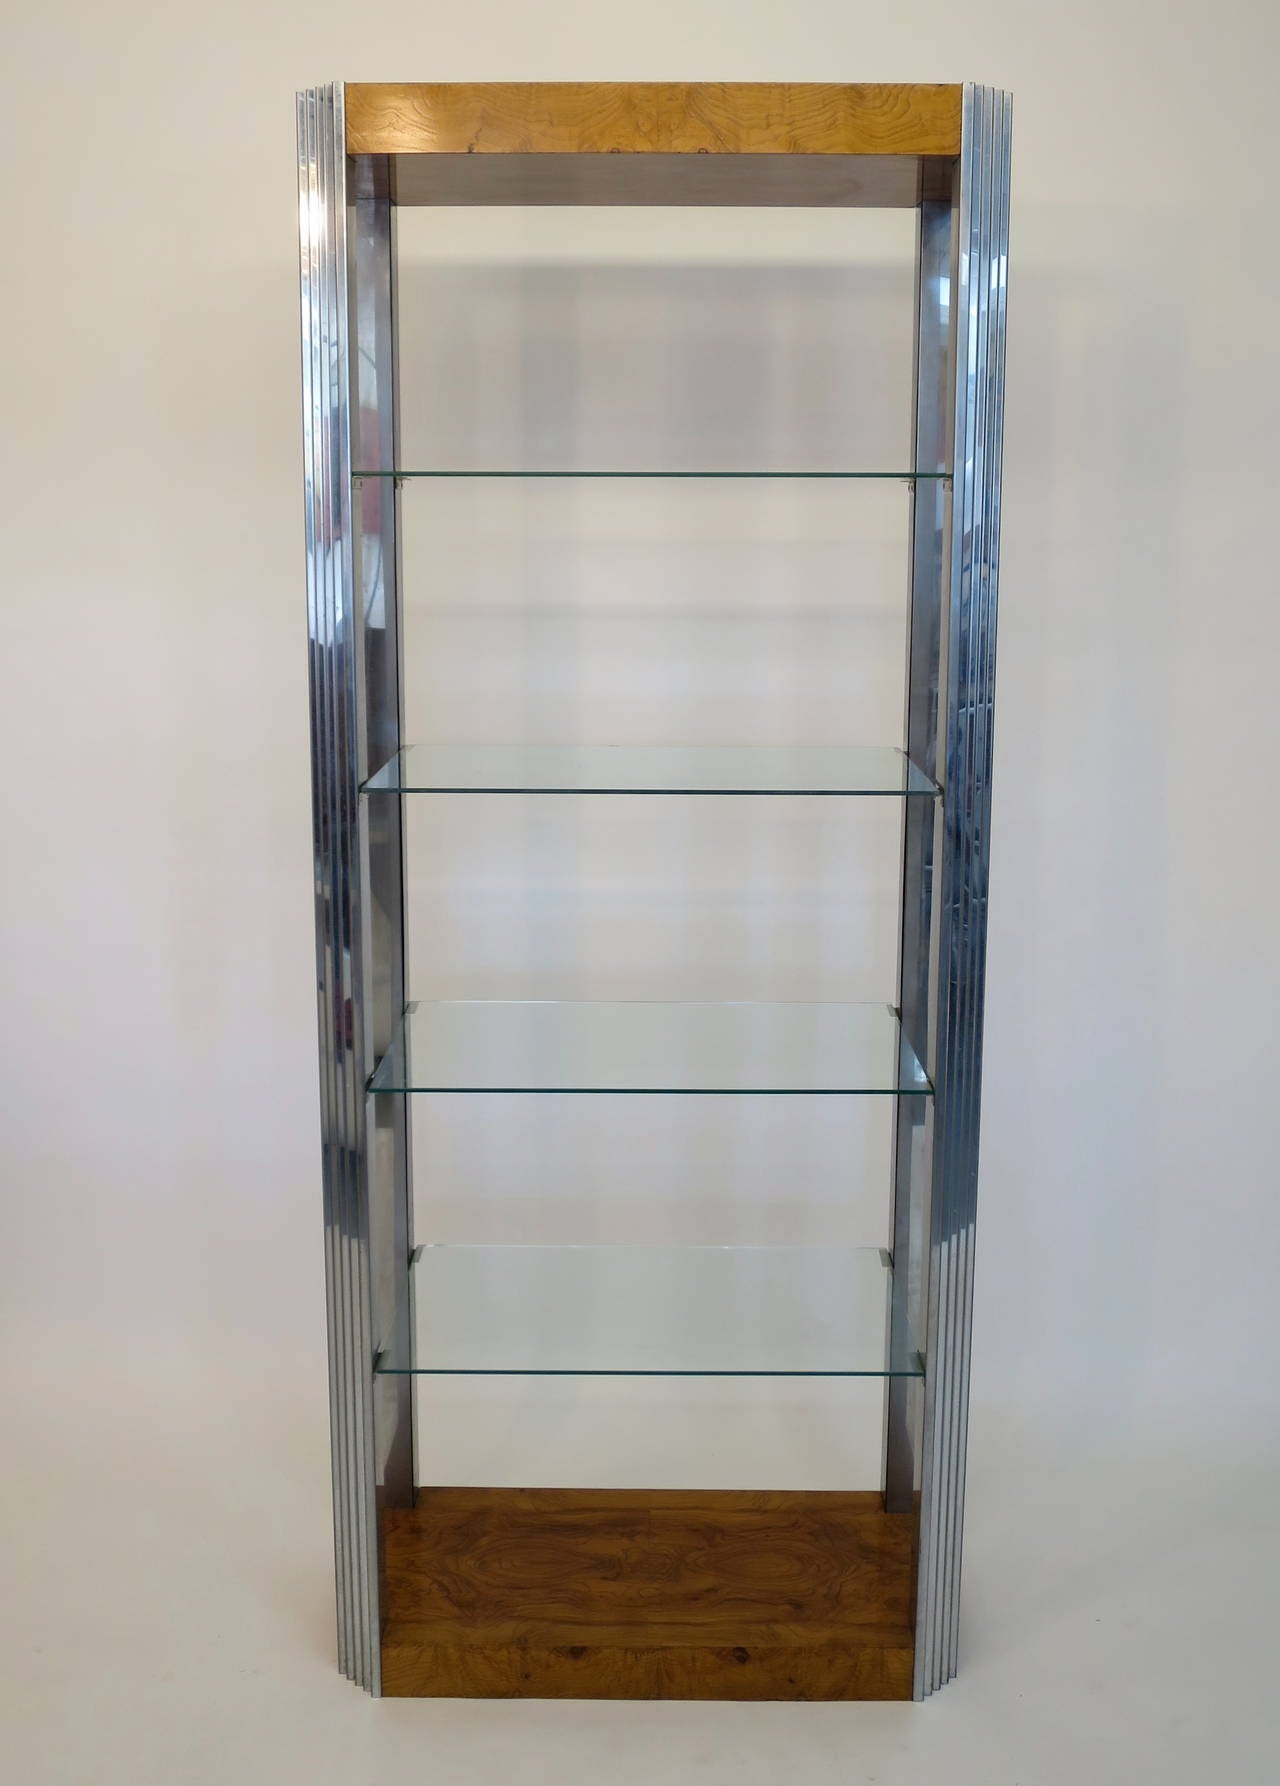 Milo Baughman burl wood and chrome etagere with four glass shelves. Manufactured by Thayer Coggin, circa 1970s.